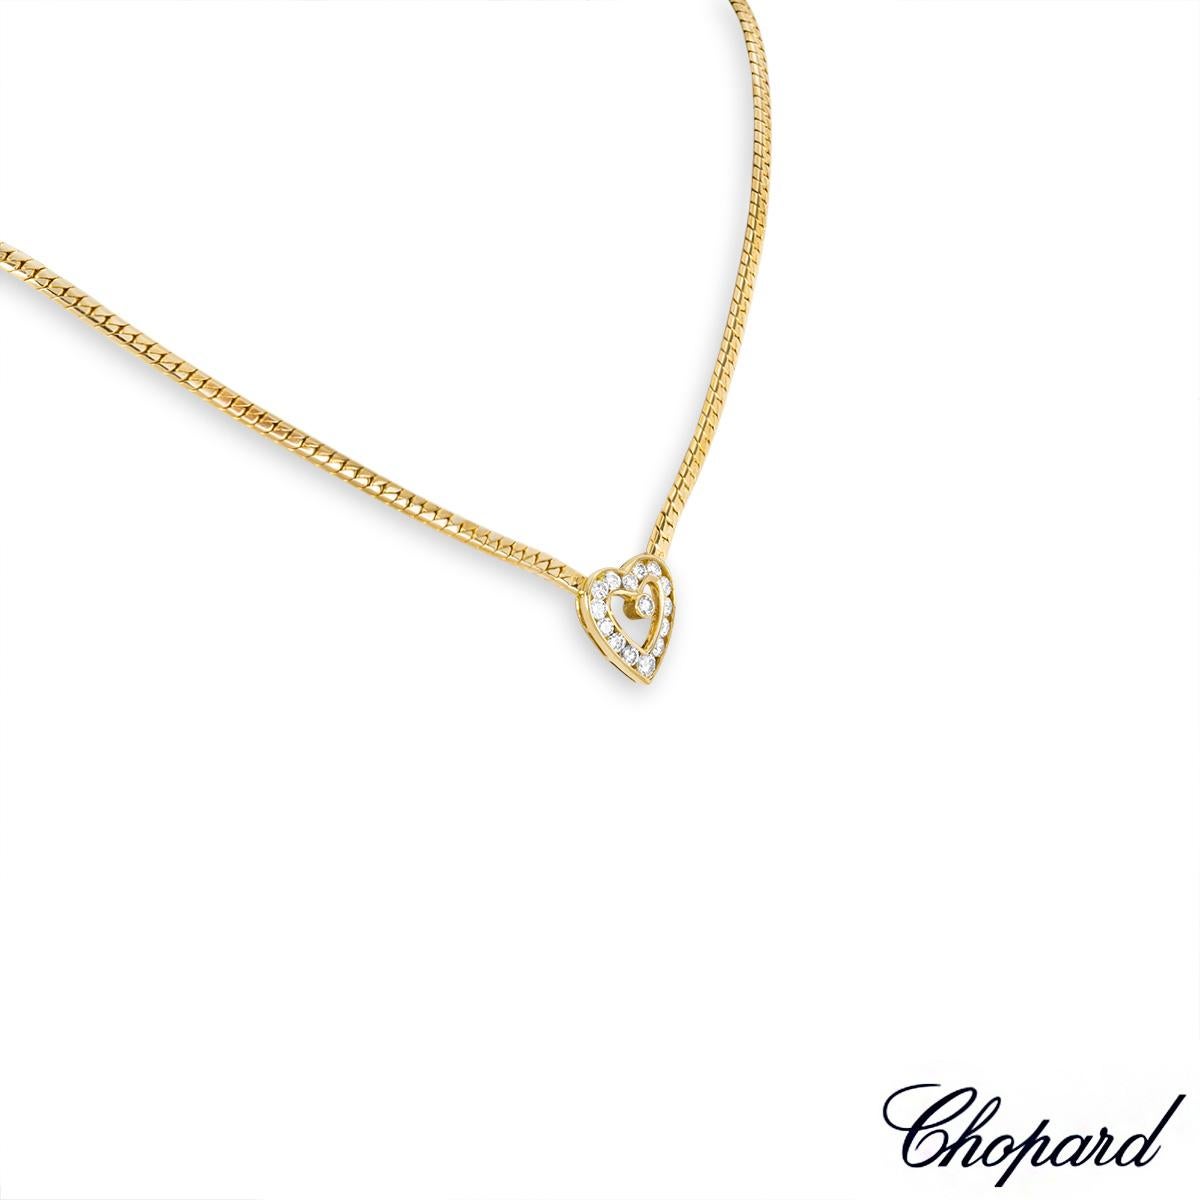 A beautiful 18k yellow gold diamond necklace by Chopard. The necklace features an open heart motif set to the centre, channel set with 14 round brilliant cut diamonds and bezel set with a single diamond, with an approximate total weight of 0.94ct,